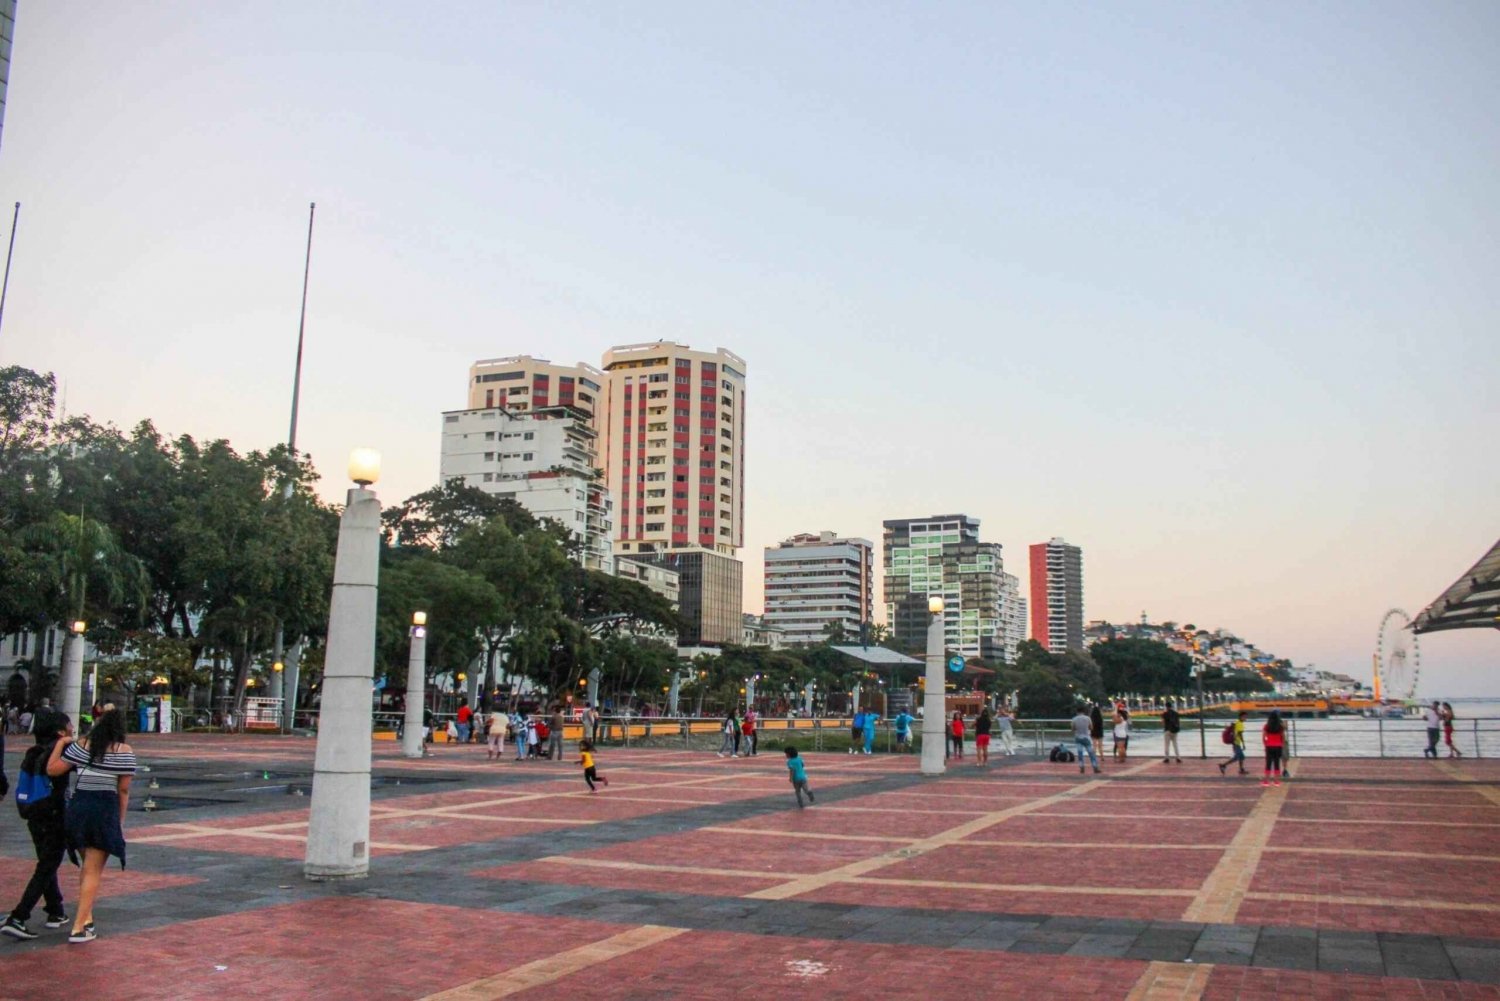 Self-guided walking tour of Guayaquil's landmarks.